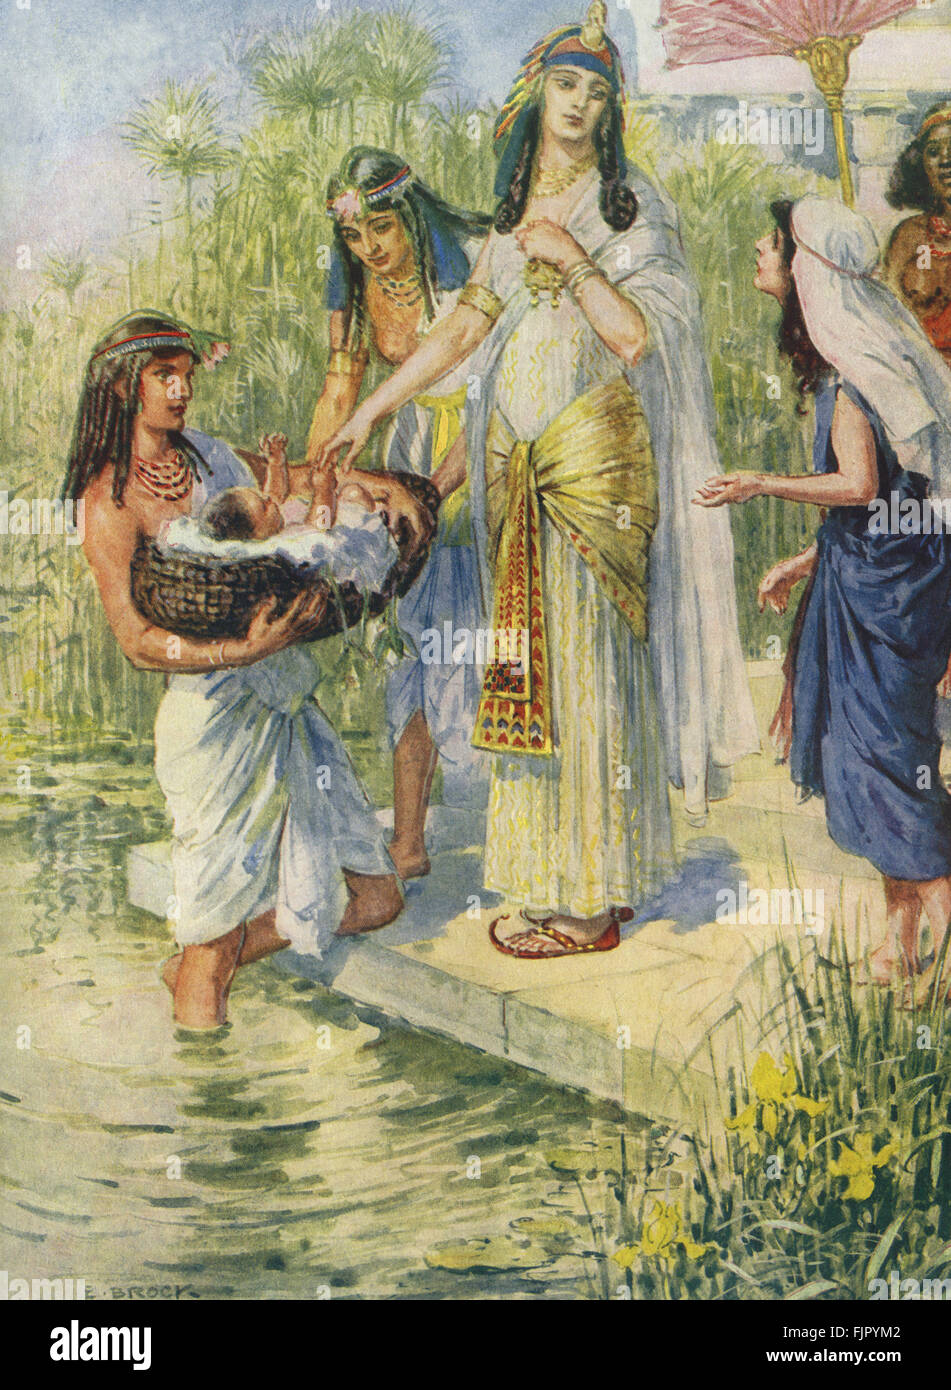 Pharoah's daughter finds baby Moses.' Then said his sister to Pharaoh's daughter, Shall I go and call to thee a nurse of the Hebrew women, that she may nurse the child for thee?' Exodus 2 / 7. Illustration by C E Brock 1870 -1938 Stock Photo